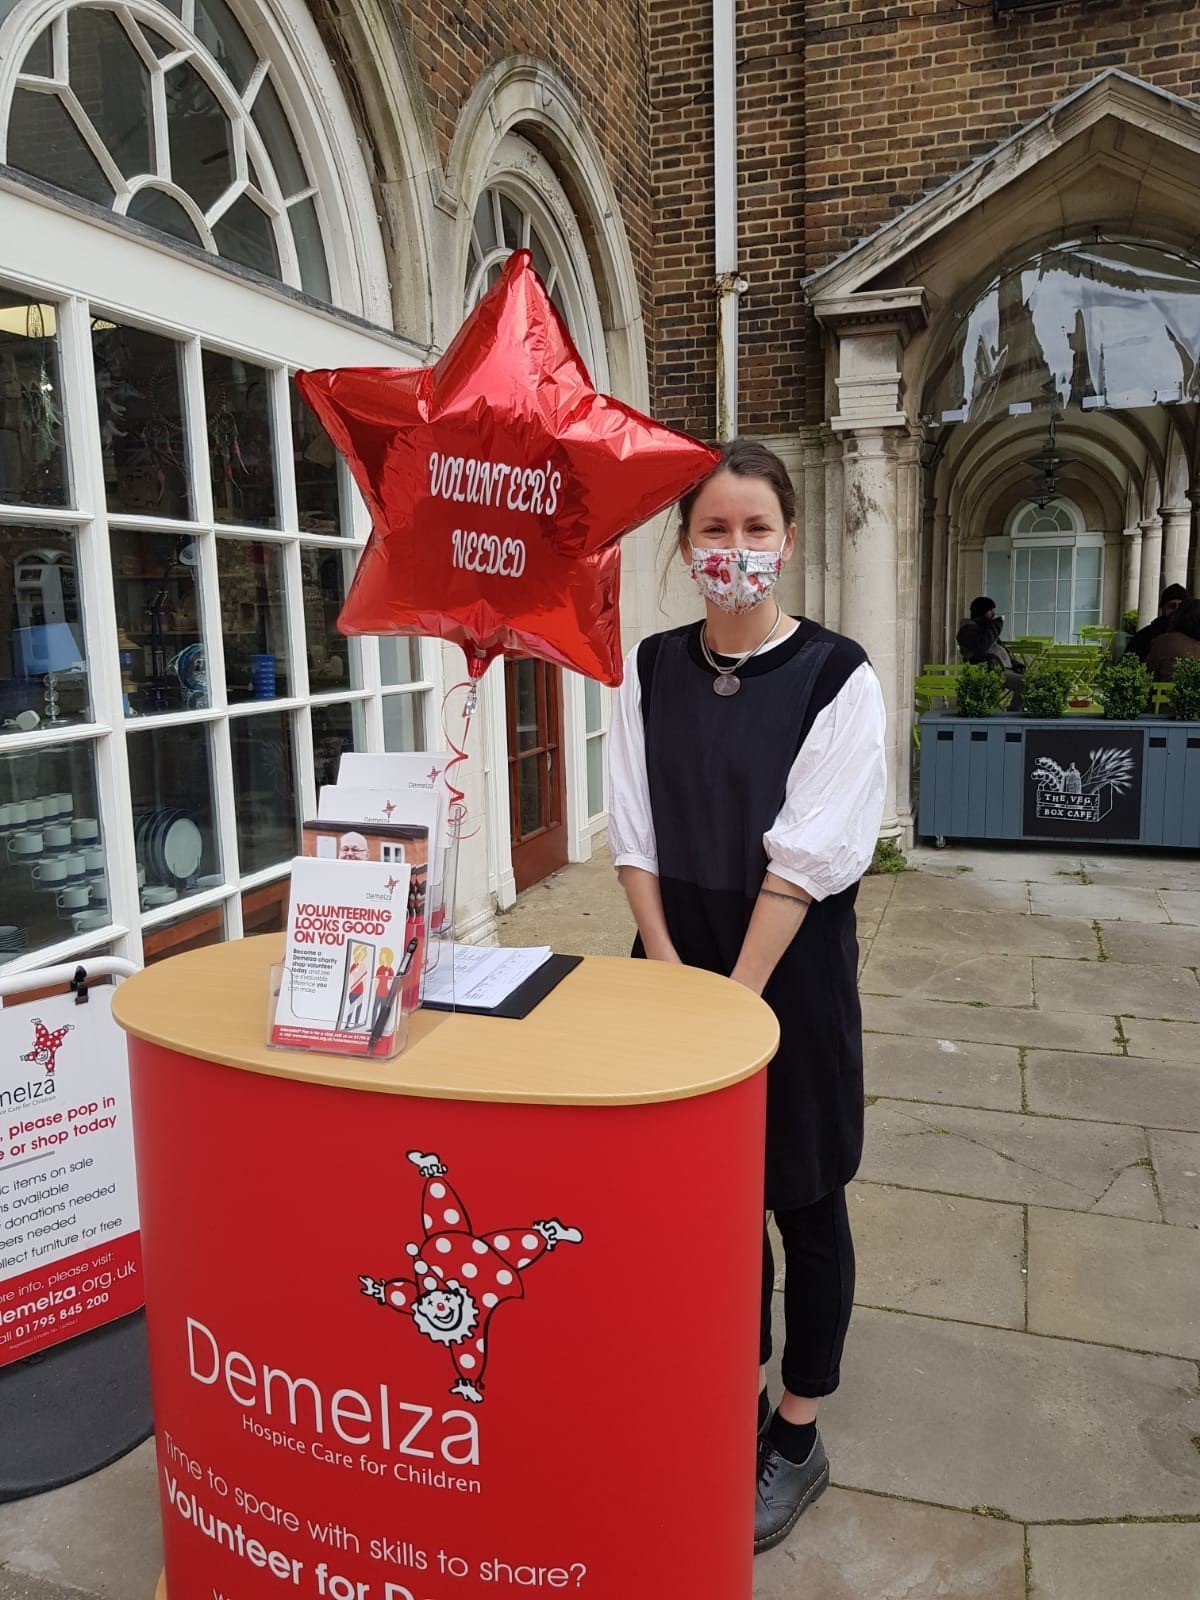 A woman wearing a face mask, standing behind a volunteer recruitment stand, outside the Canterbury charity shop.